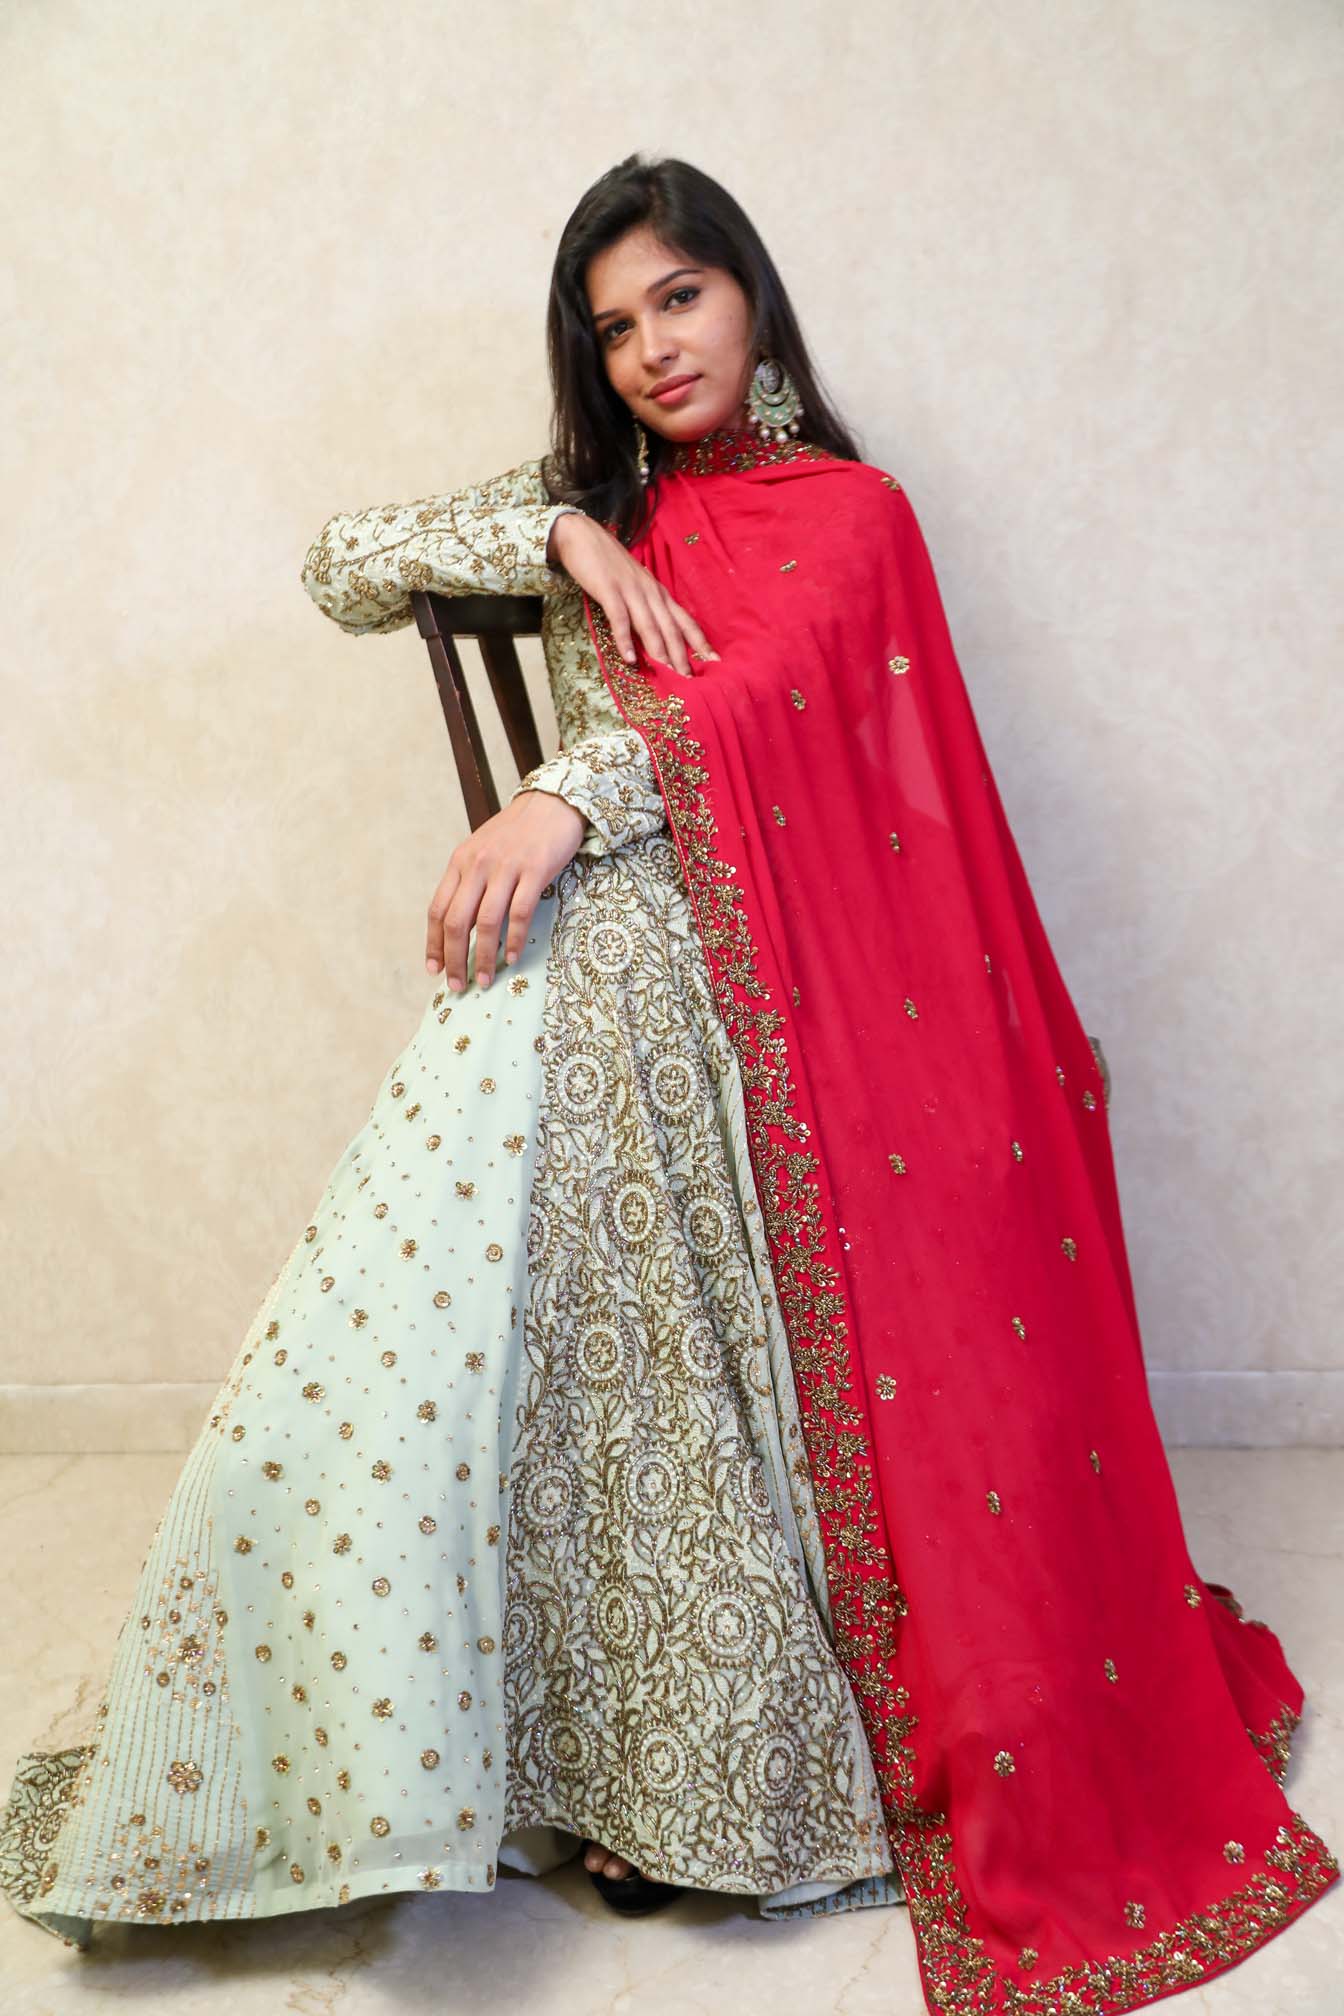 Laila – Ethnic Gown